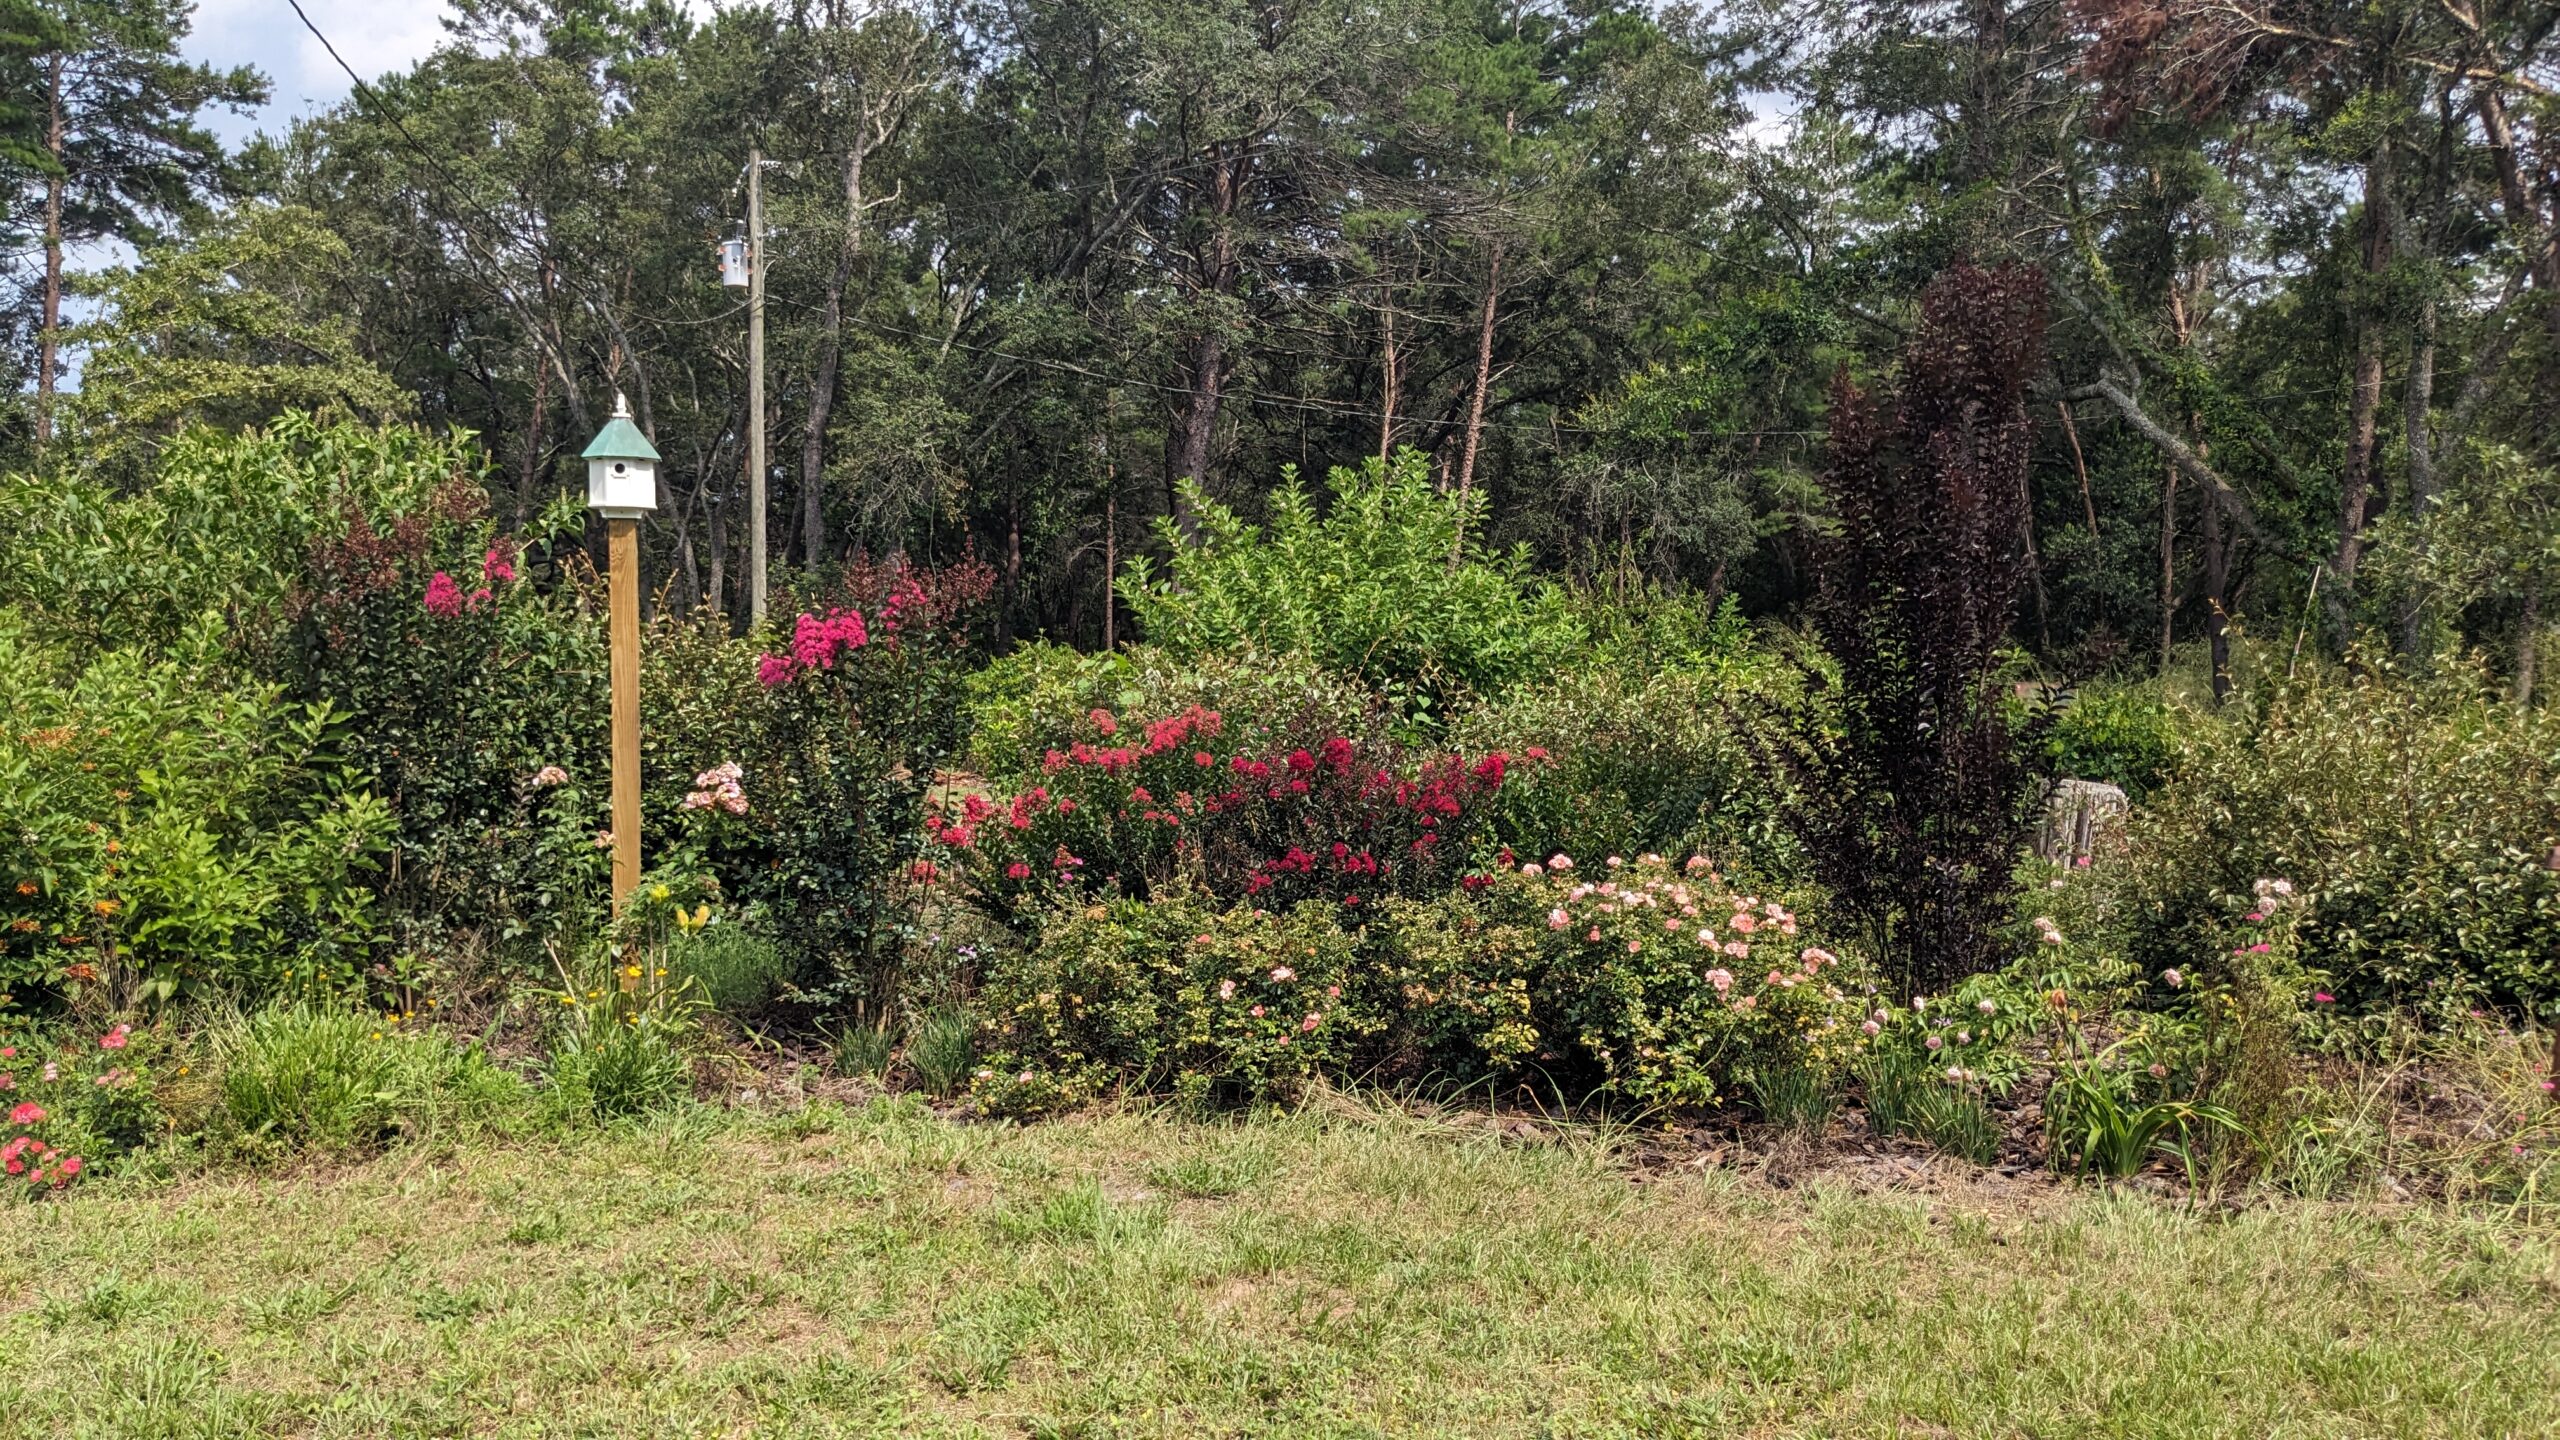 sungarden with birdhouse, drift roses, crepe myrtles and more